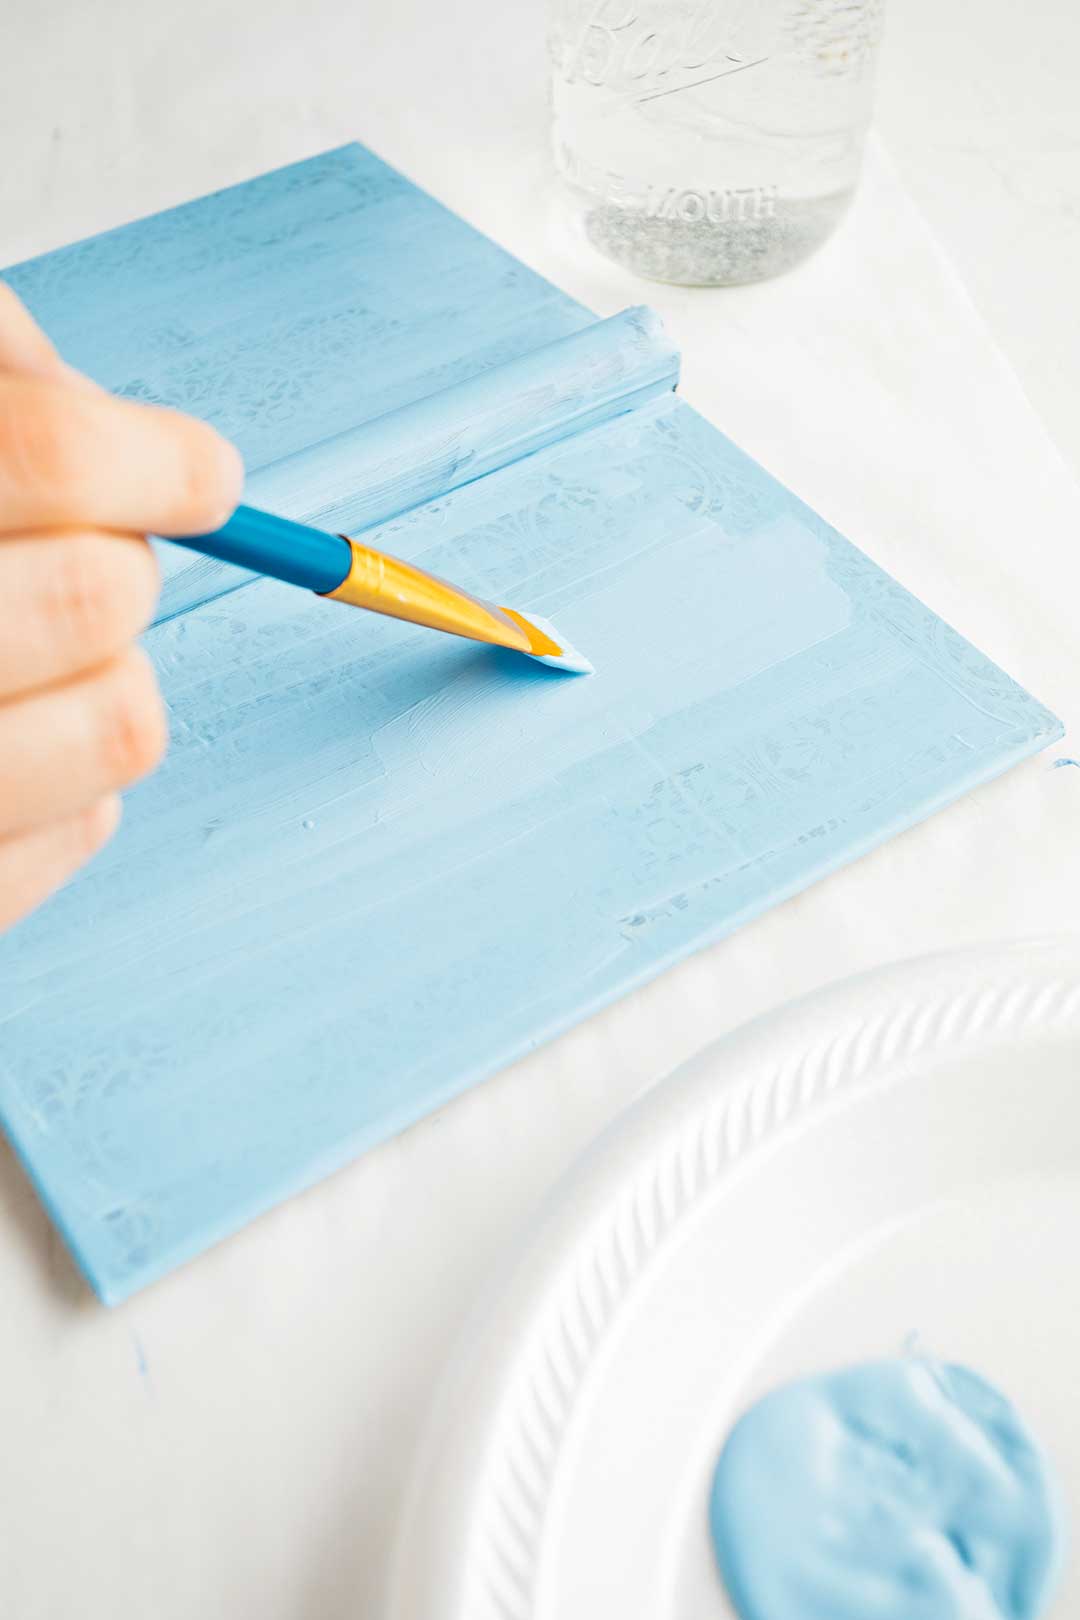 Person paints book cover a light blue cover. White styrofoam plate of paint rests to the right.